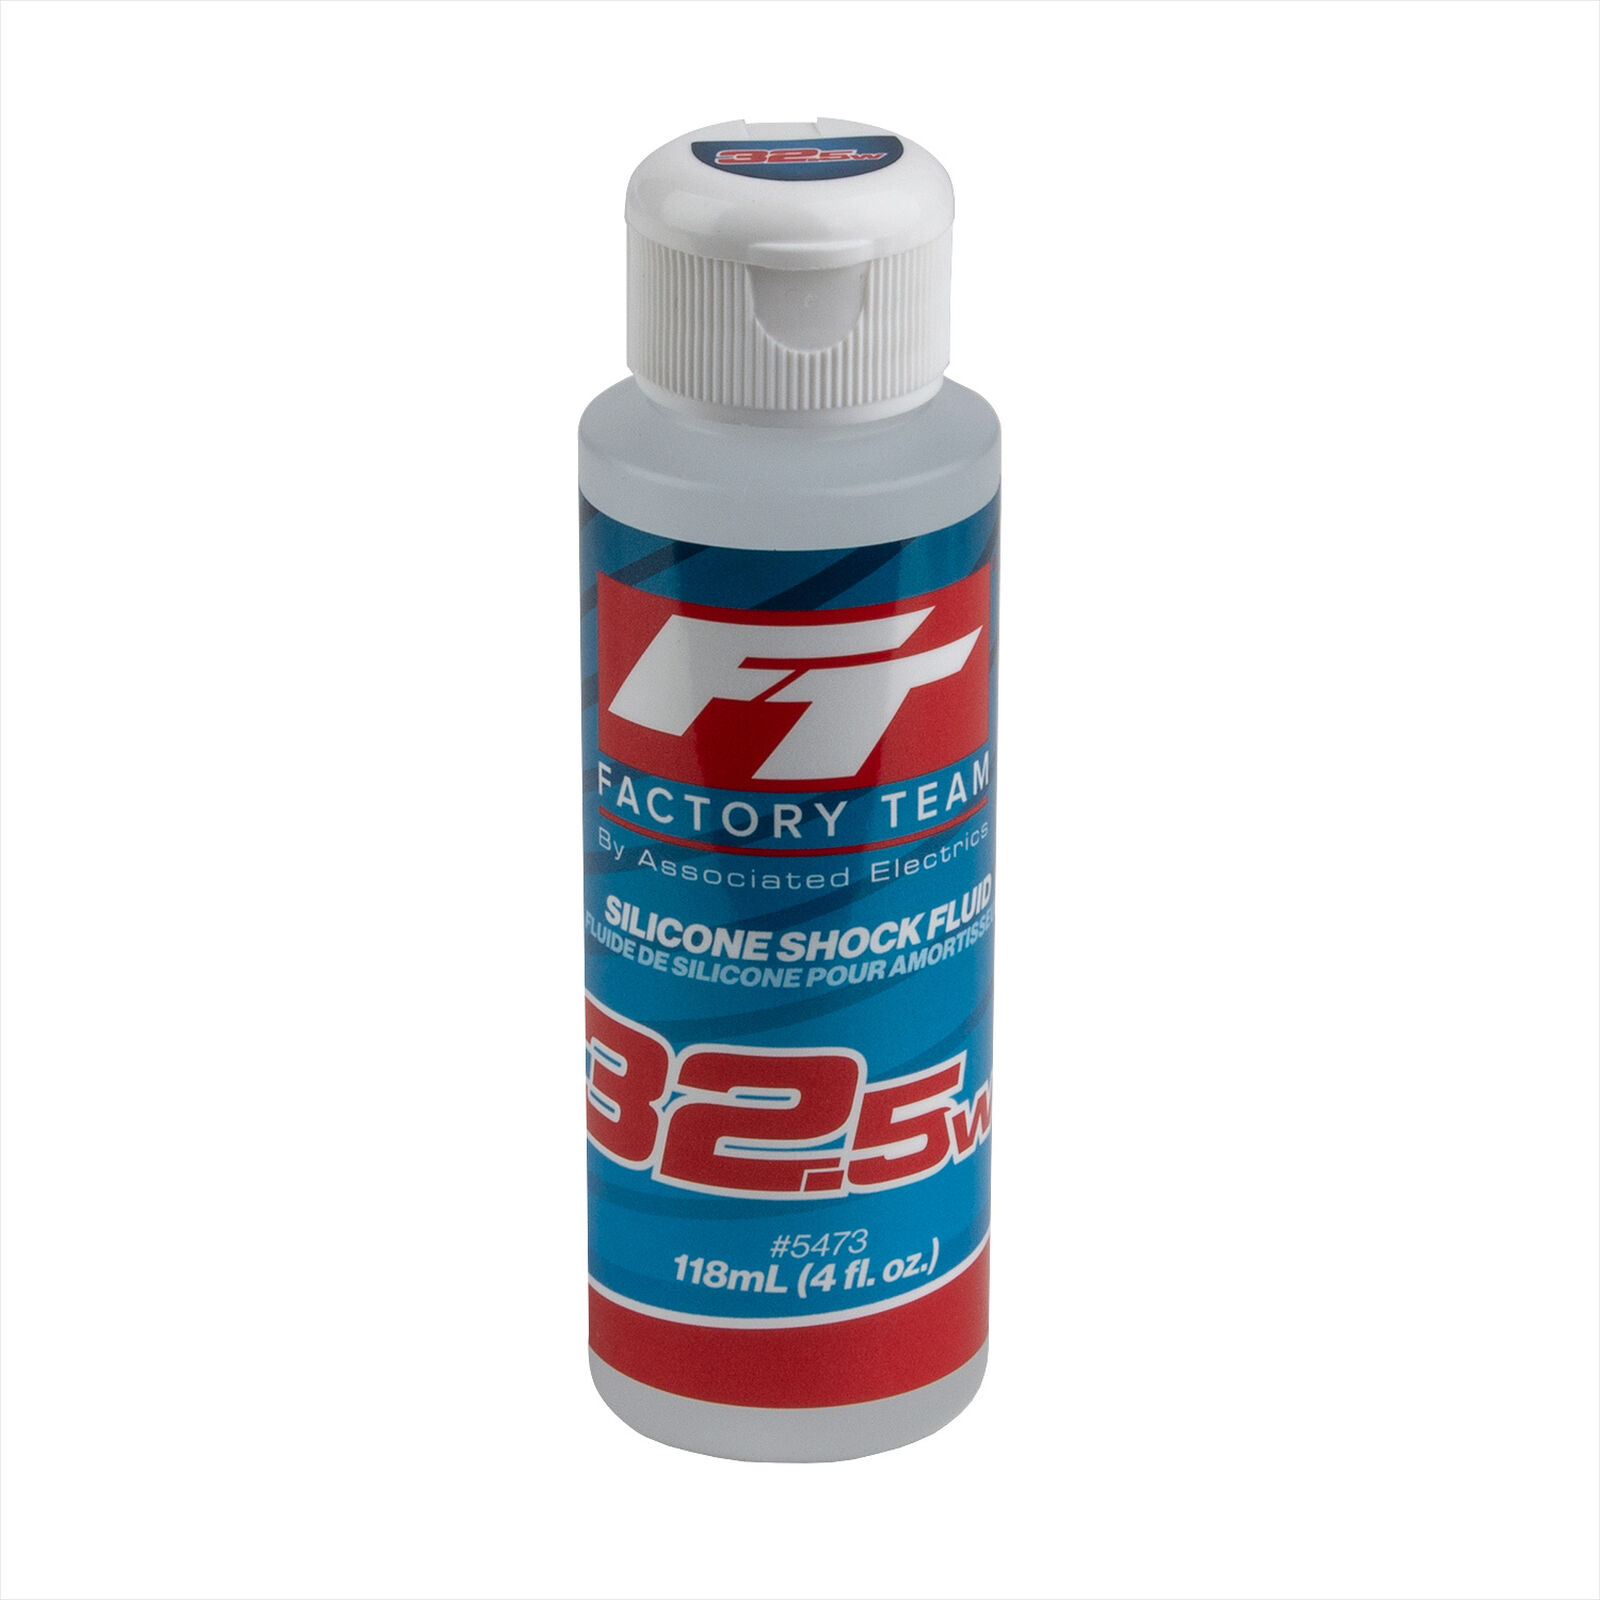 FT Silicone Shock Fluid, 32.5wt (388 cSt)